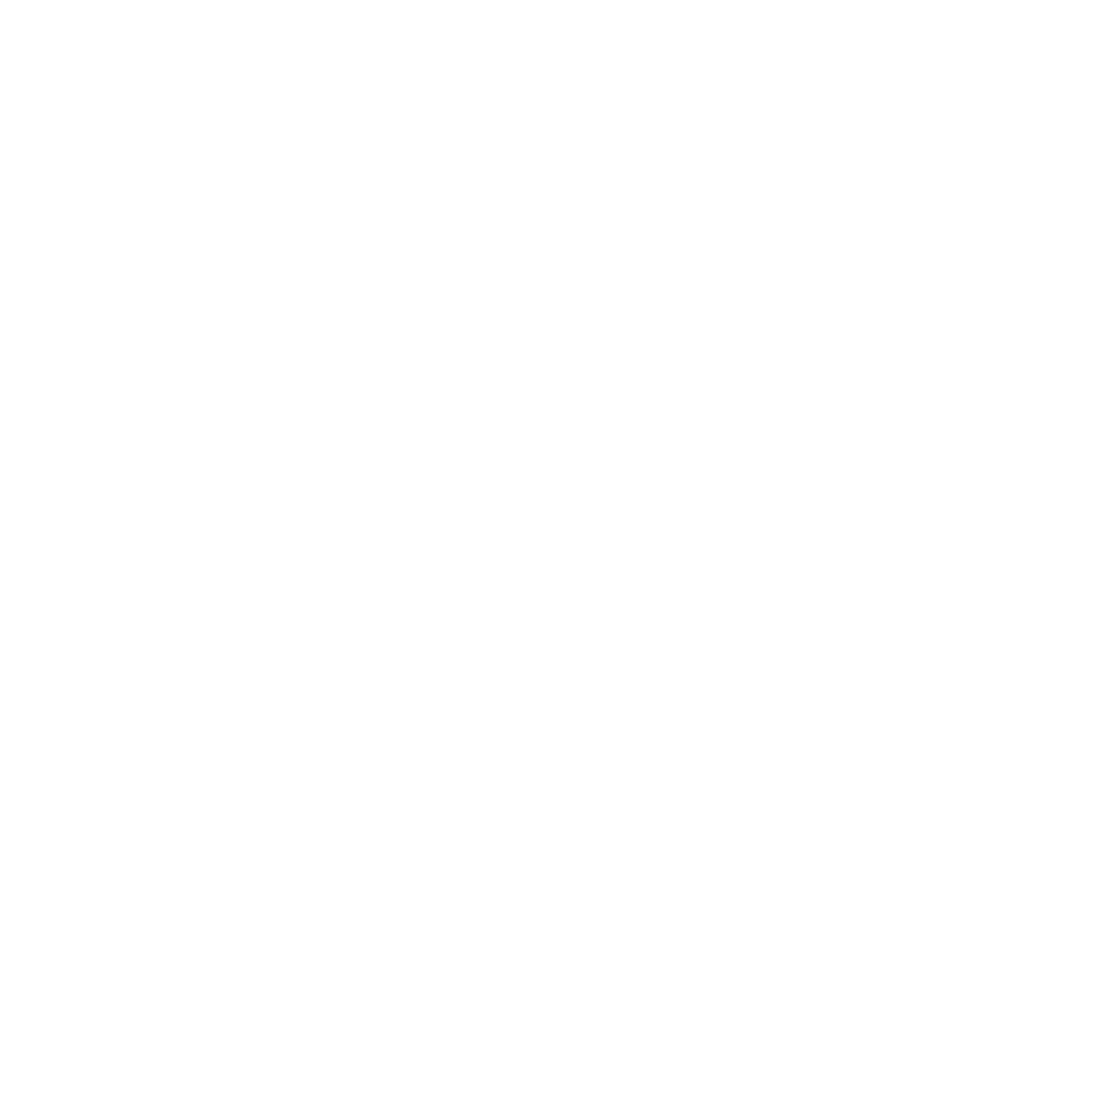 A drawing of a grappling hook, with the word “git-grapnel” under it.